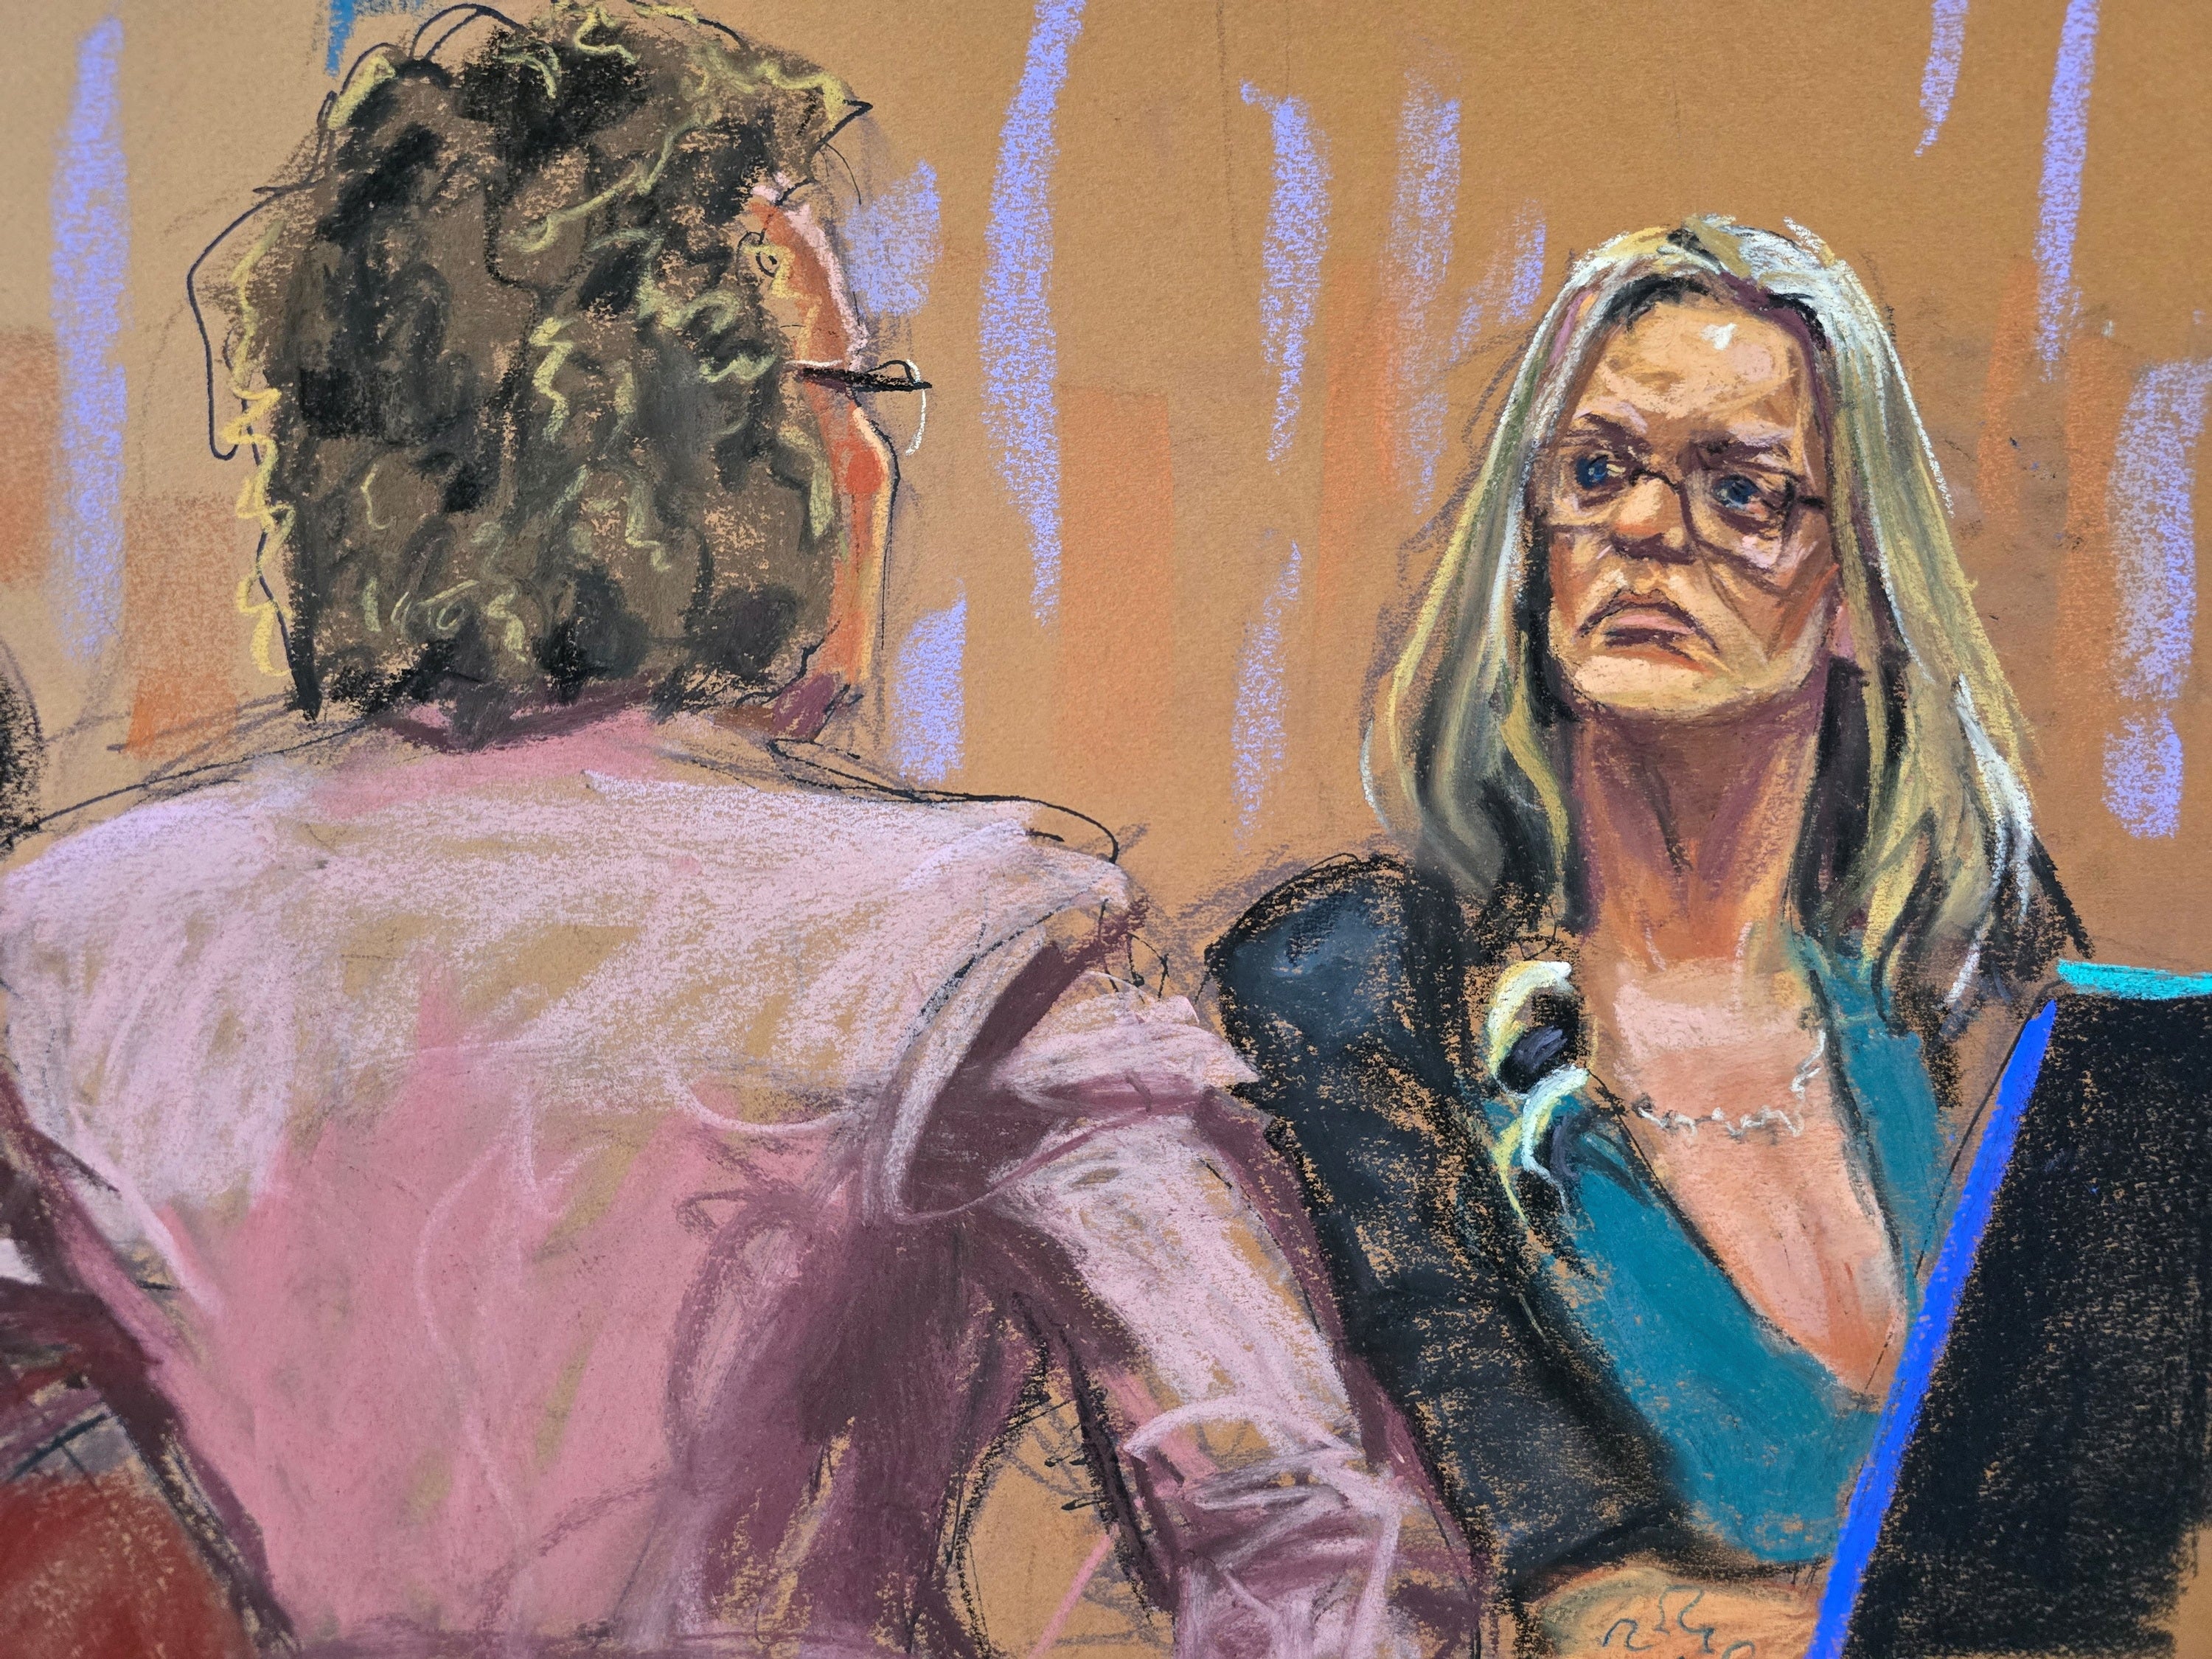 Stormy Daniels testifies in court about her dealings with Donald Trump, first brought to the public’蝉 attention by the lawyer she parted ways with five years ago